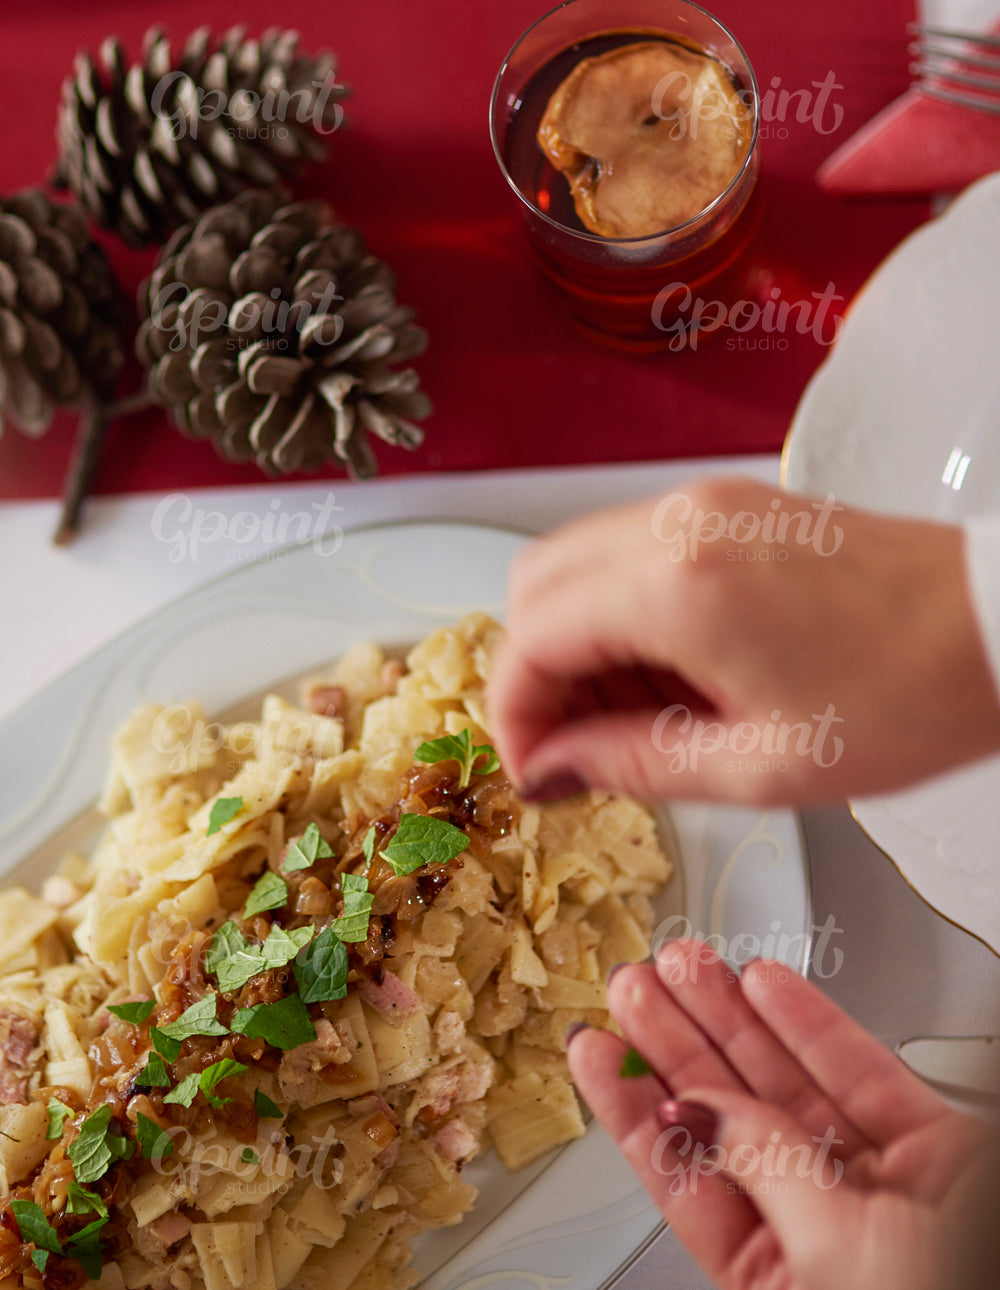 Decorating fettuccini with piece of herbs